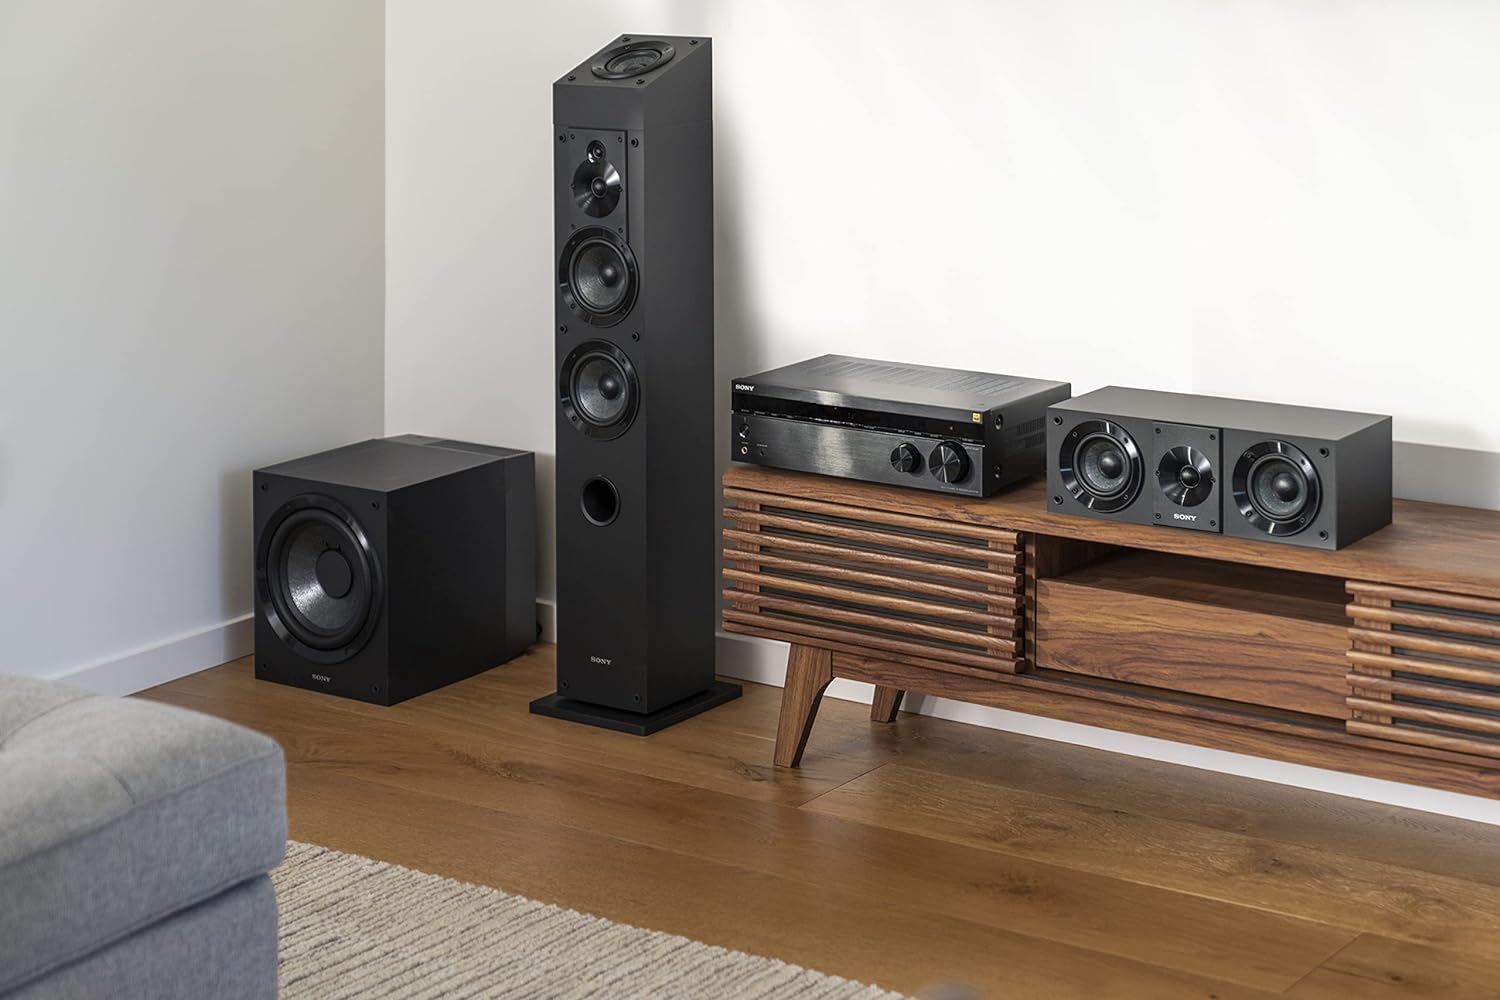 Sony 5.2Ch AV Receiver: What You Need To Hook Up Speakers